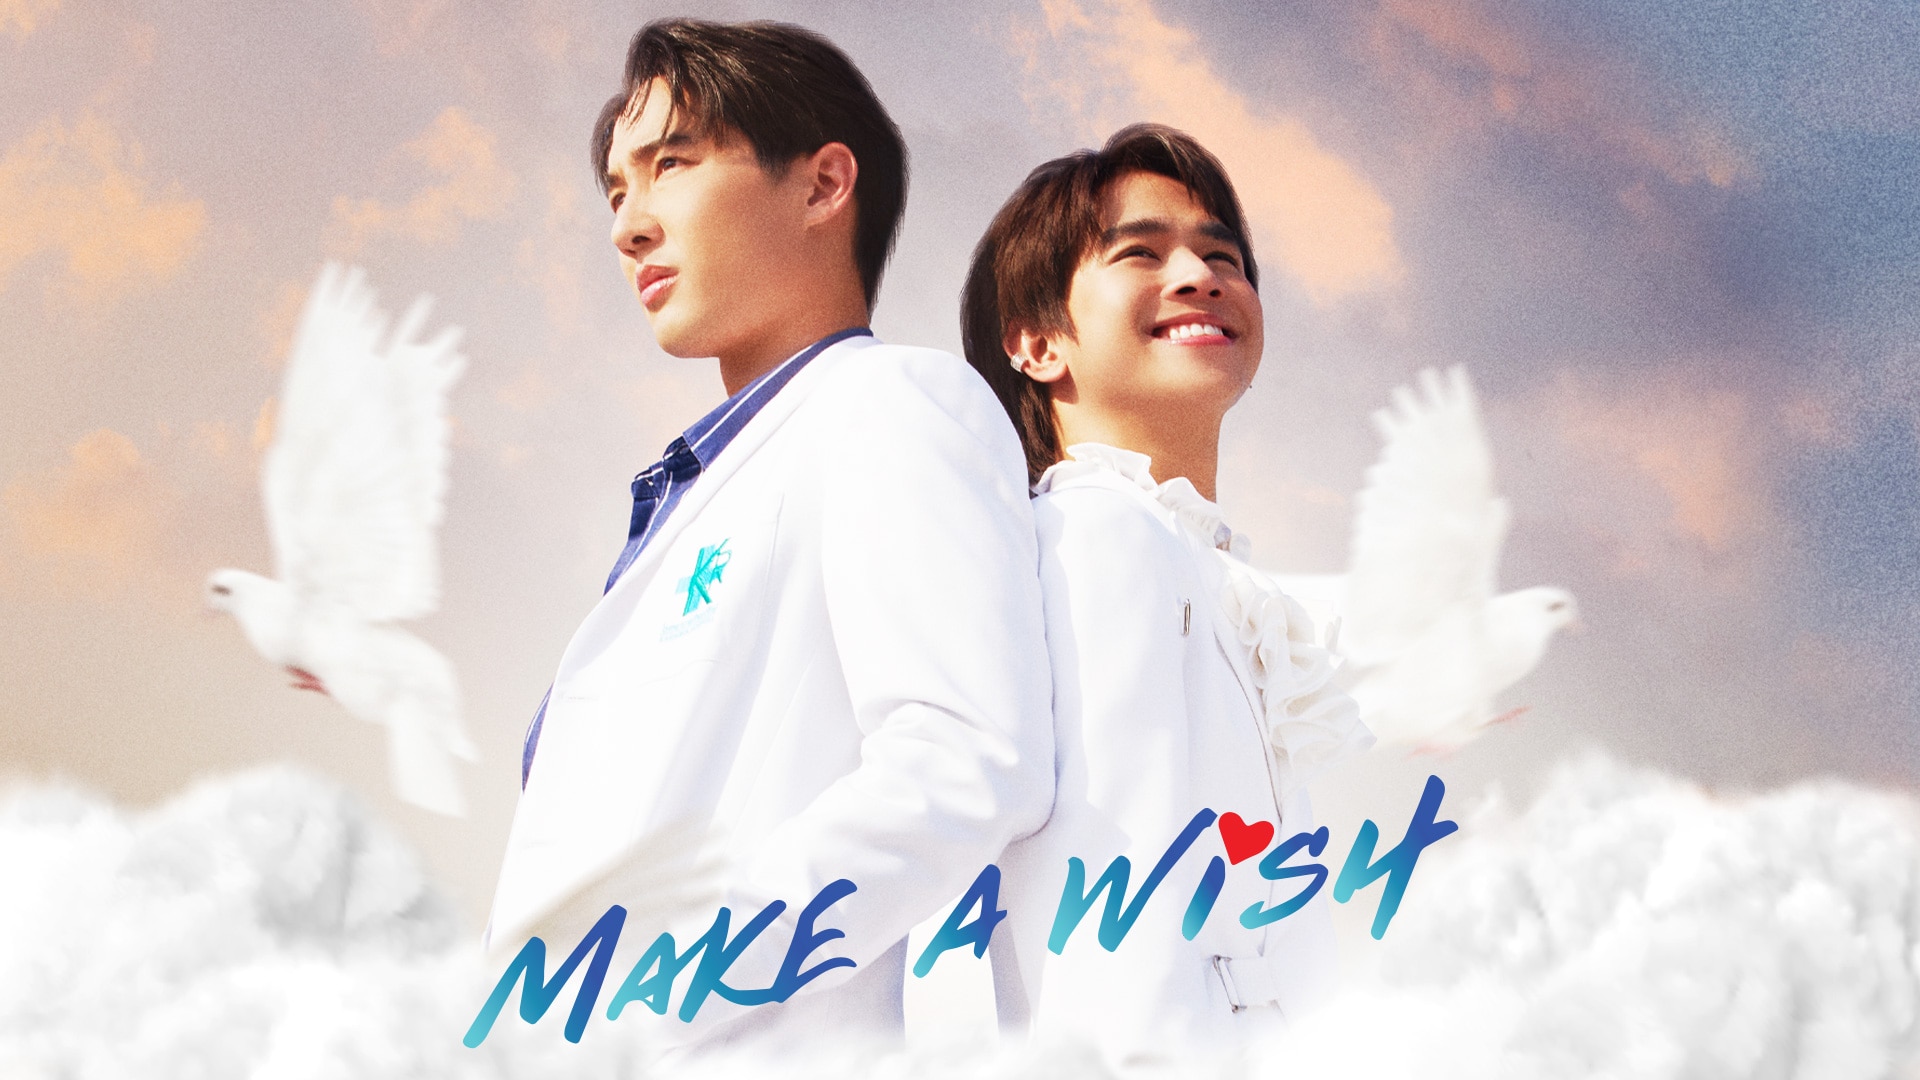 /special/makeawish/